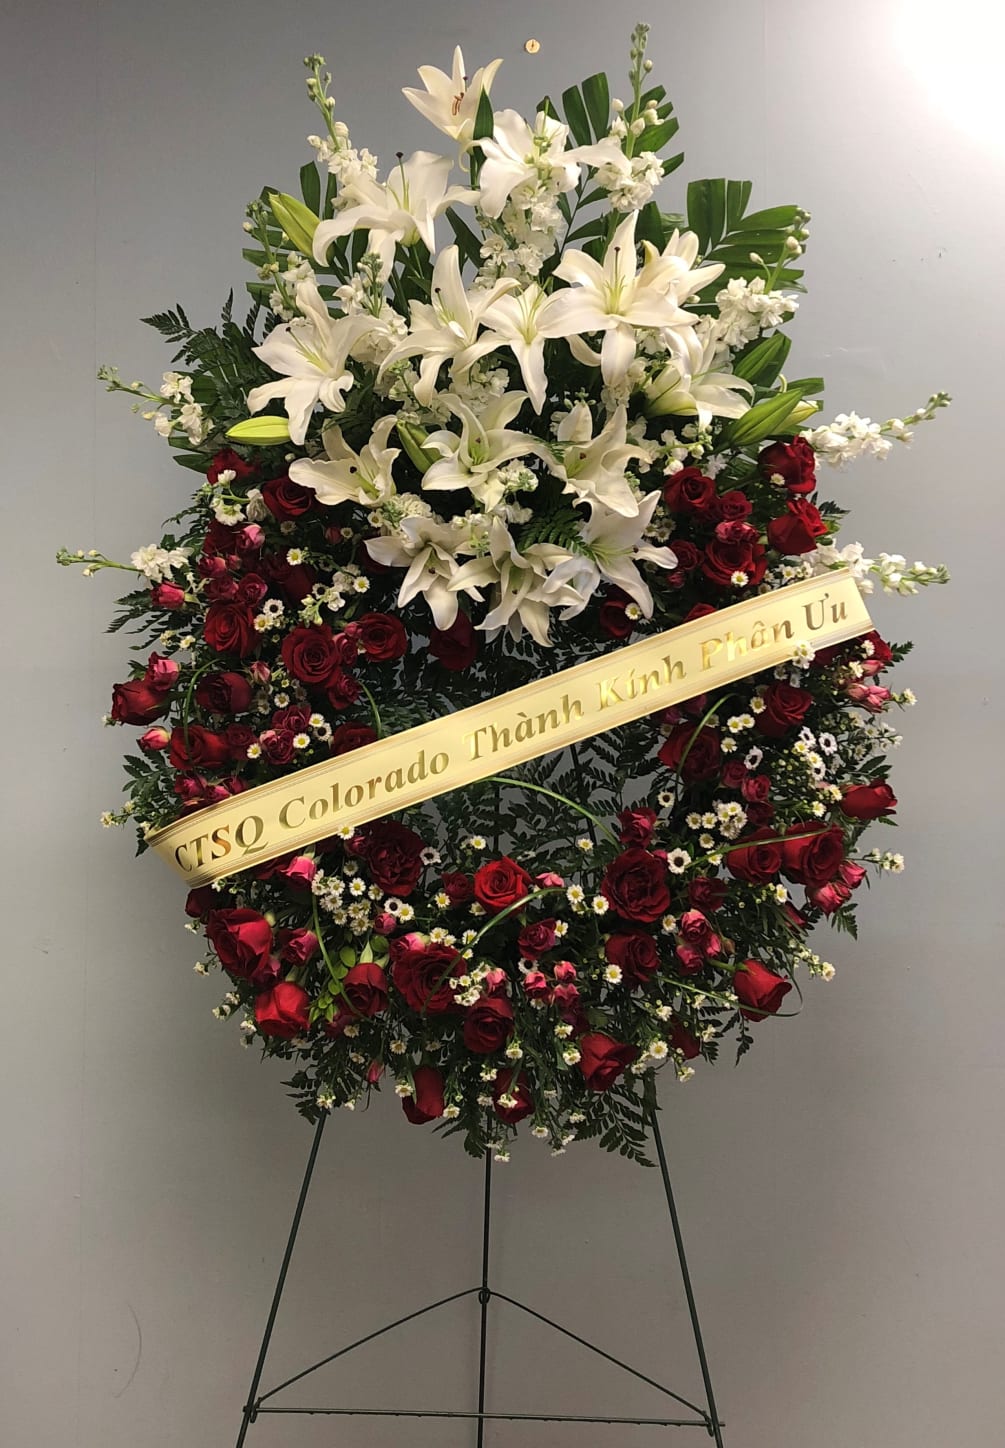 A magnificent and grand arrangement to honor those we love so dearly.